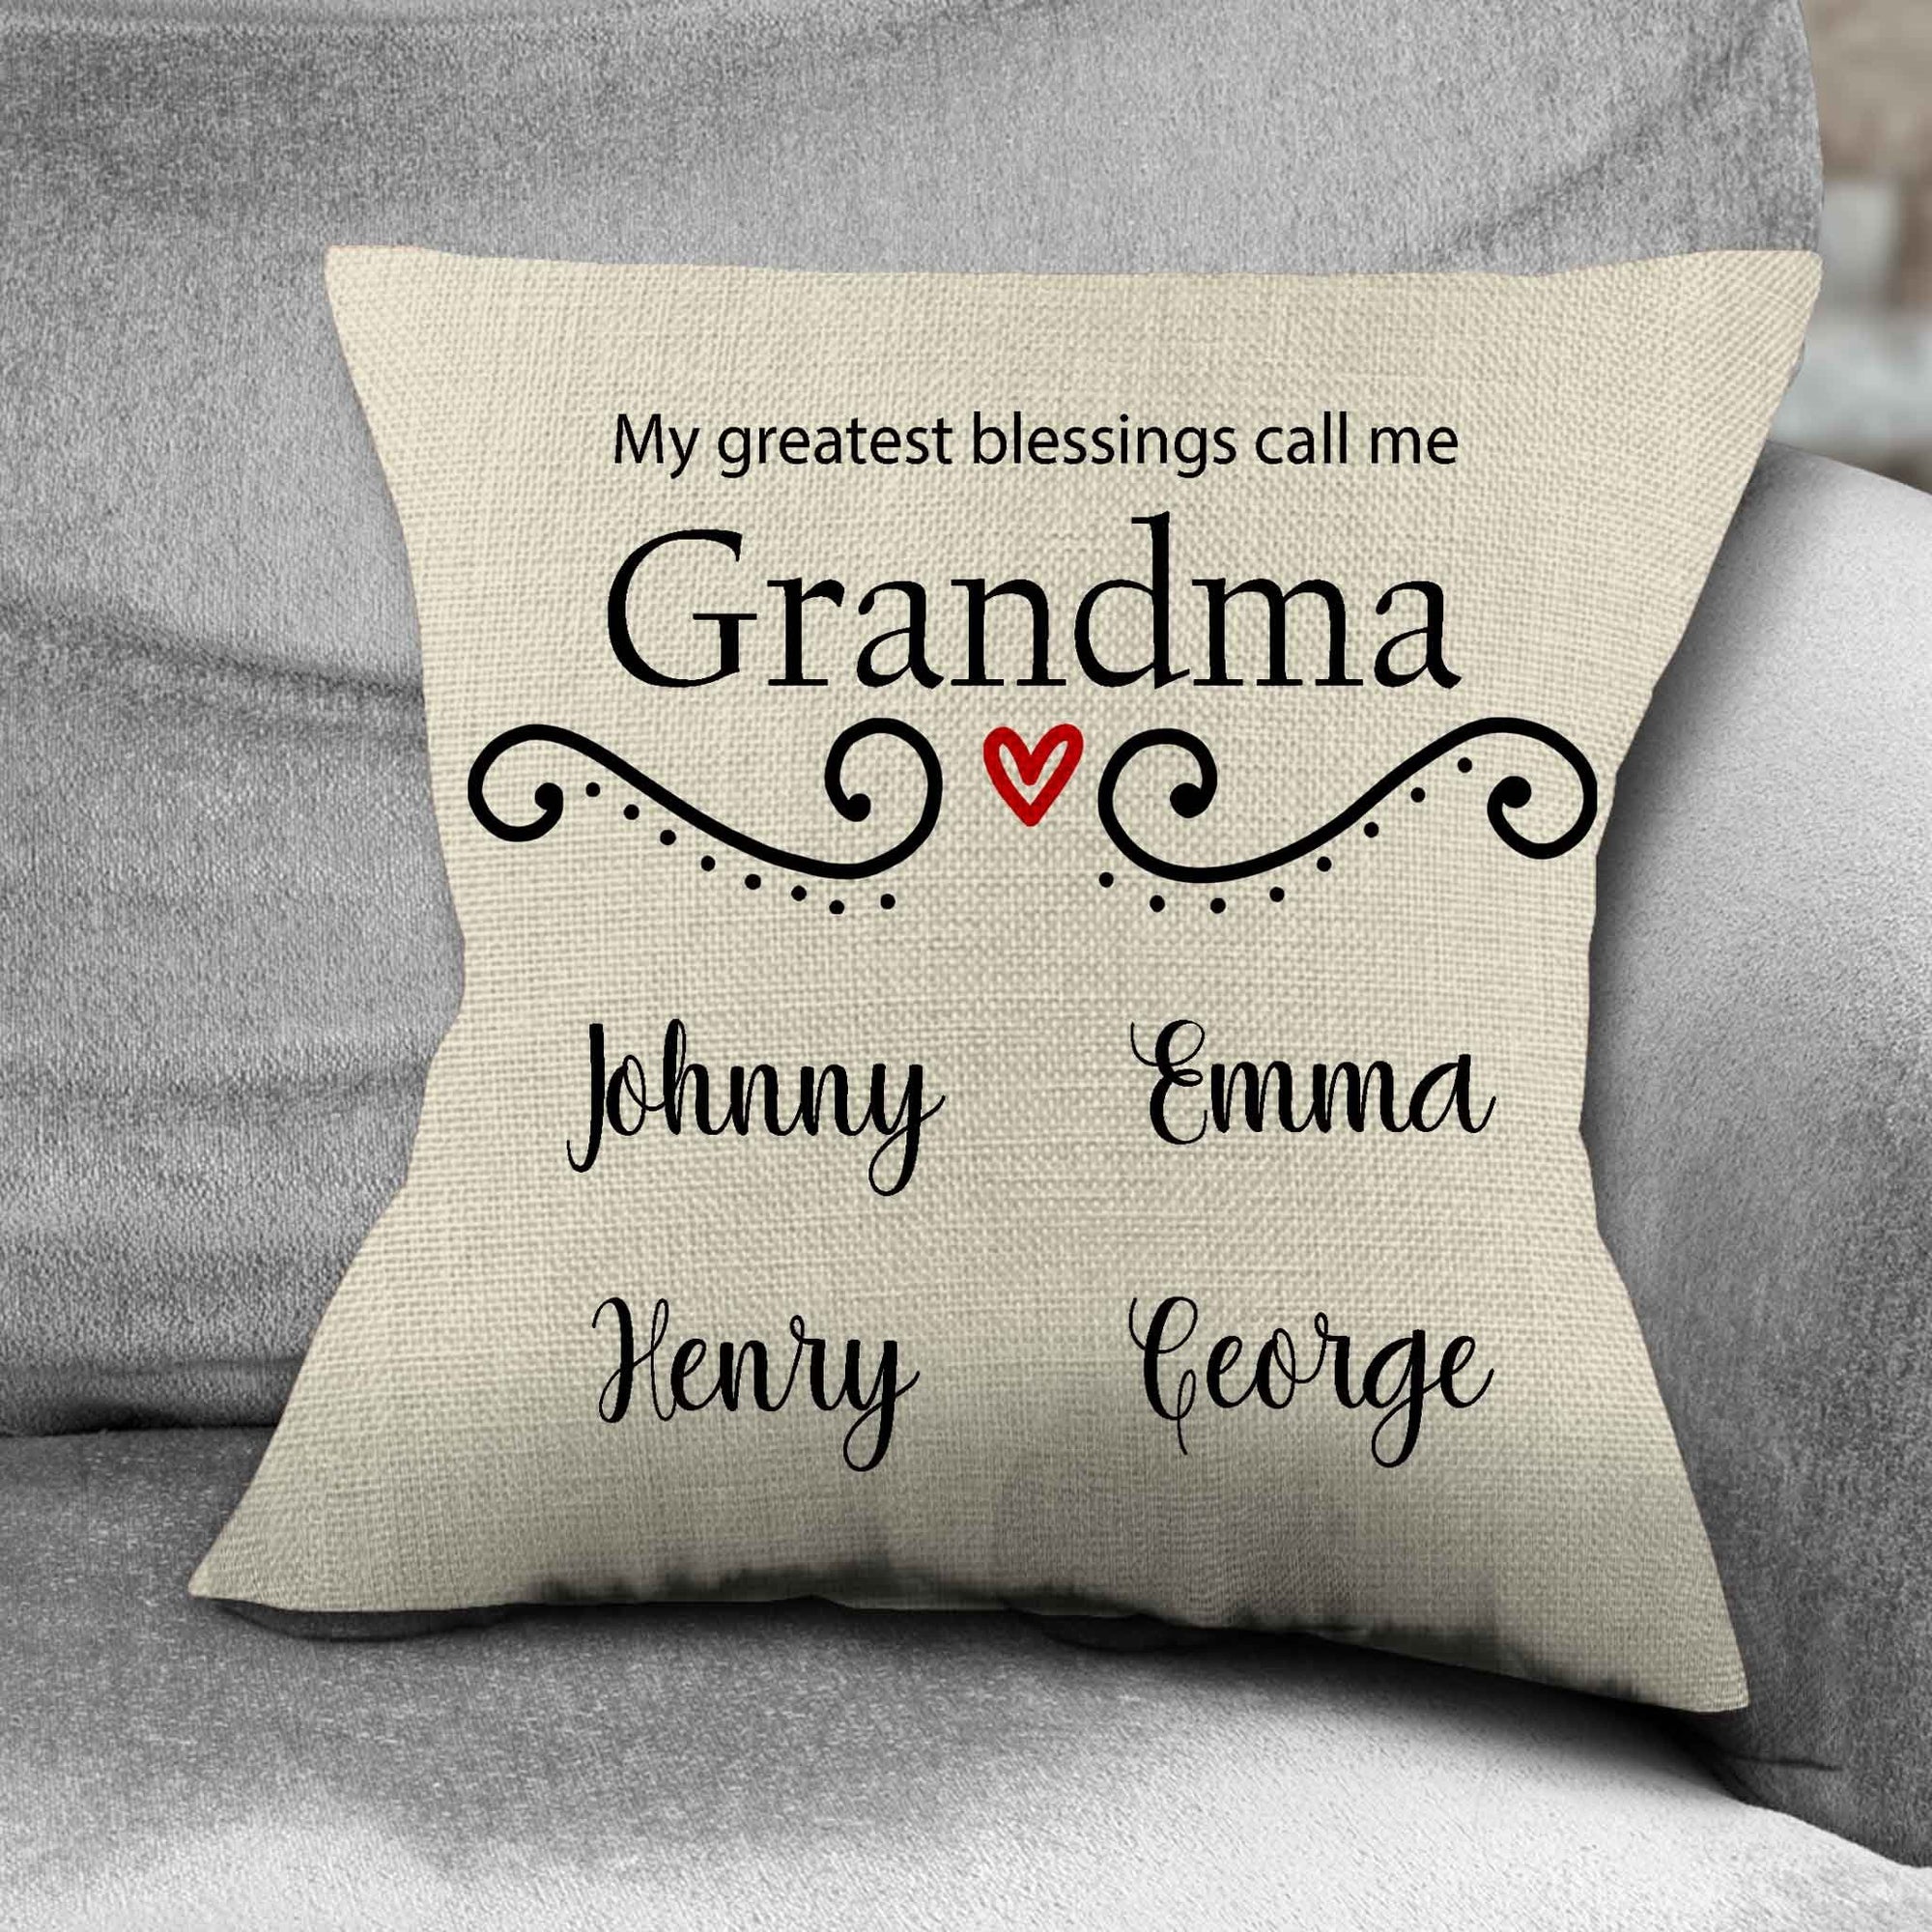 Personalized Throw Pillow | Custom Decorative Pillow | Grandma's Greatest Blessing